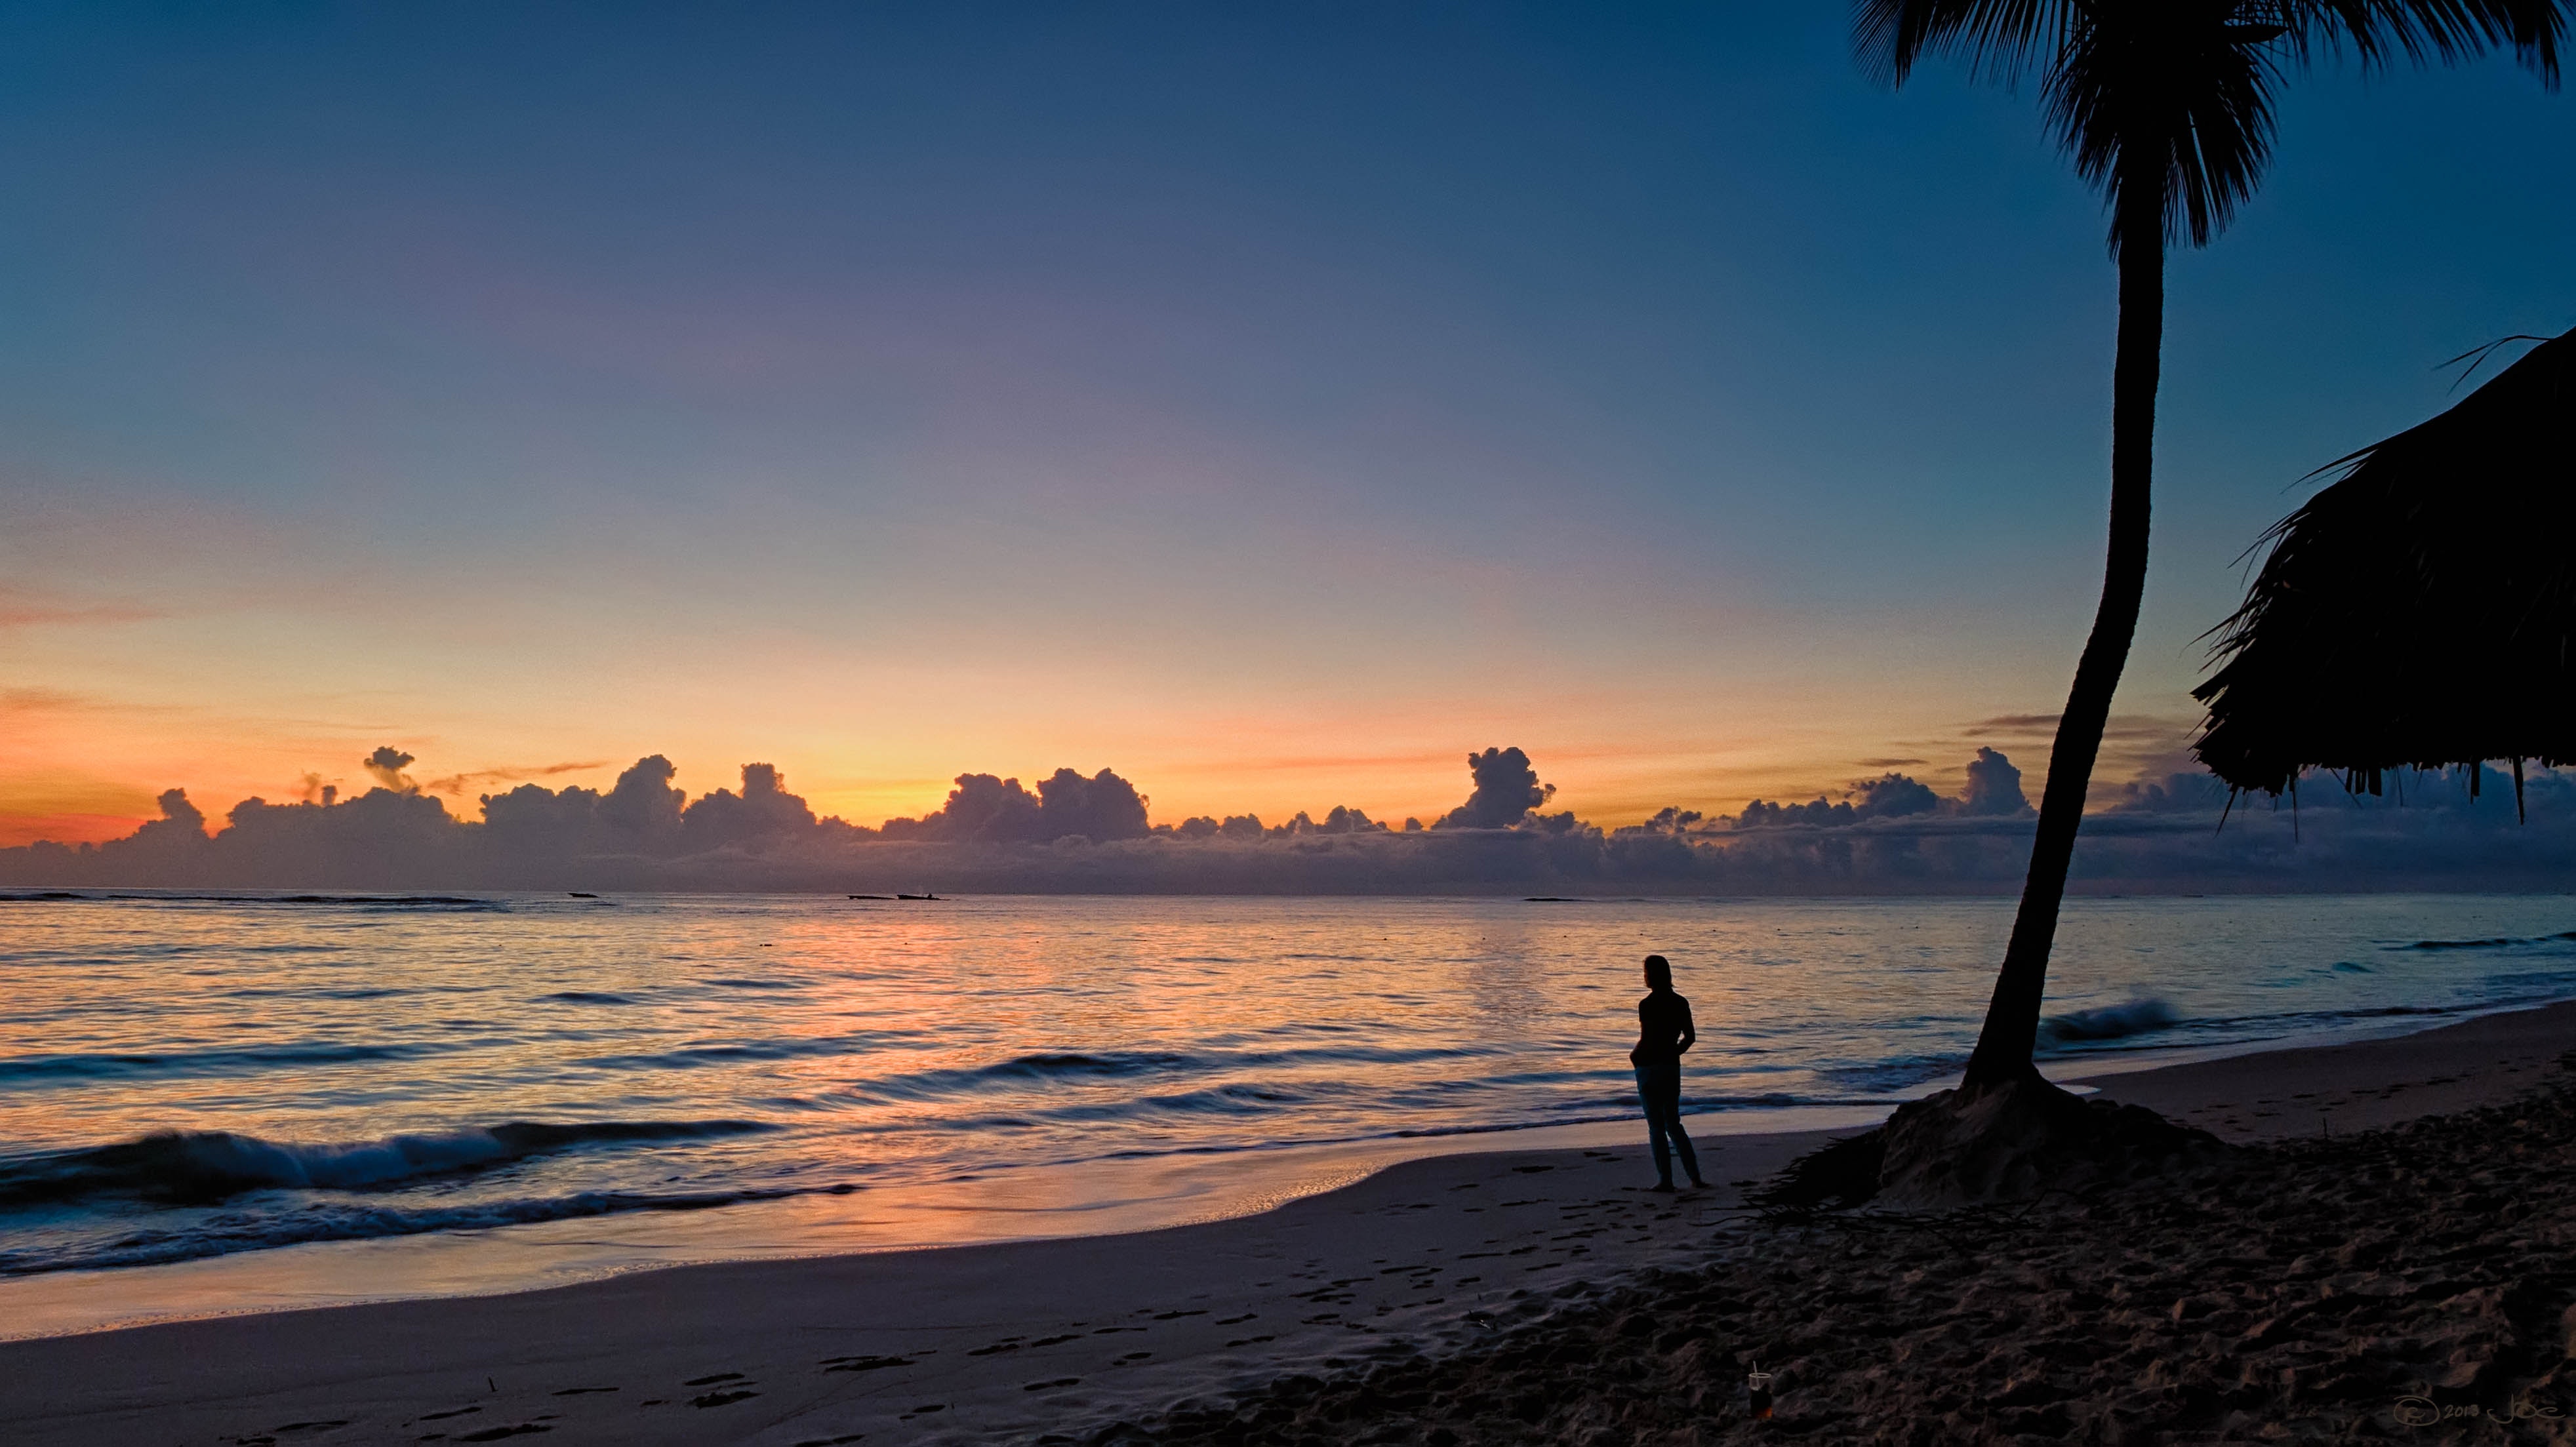 Silhouette of a person near coconut tree on shore during golden hour photo